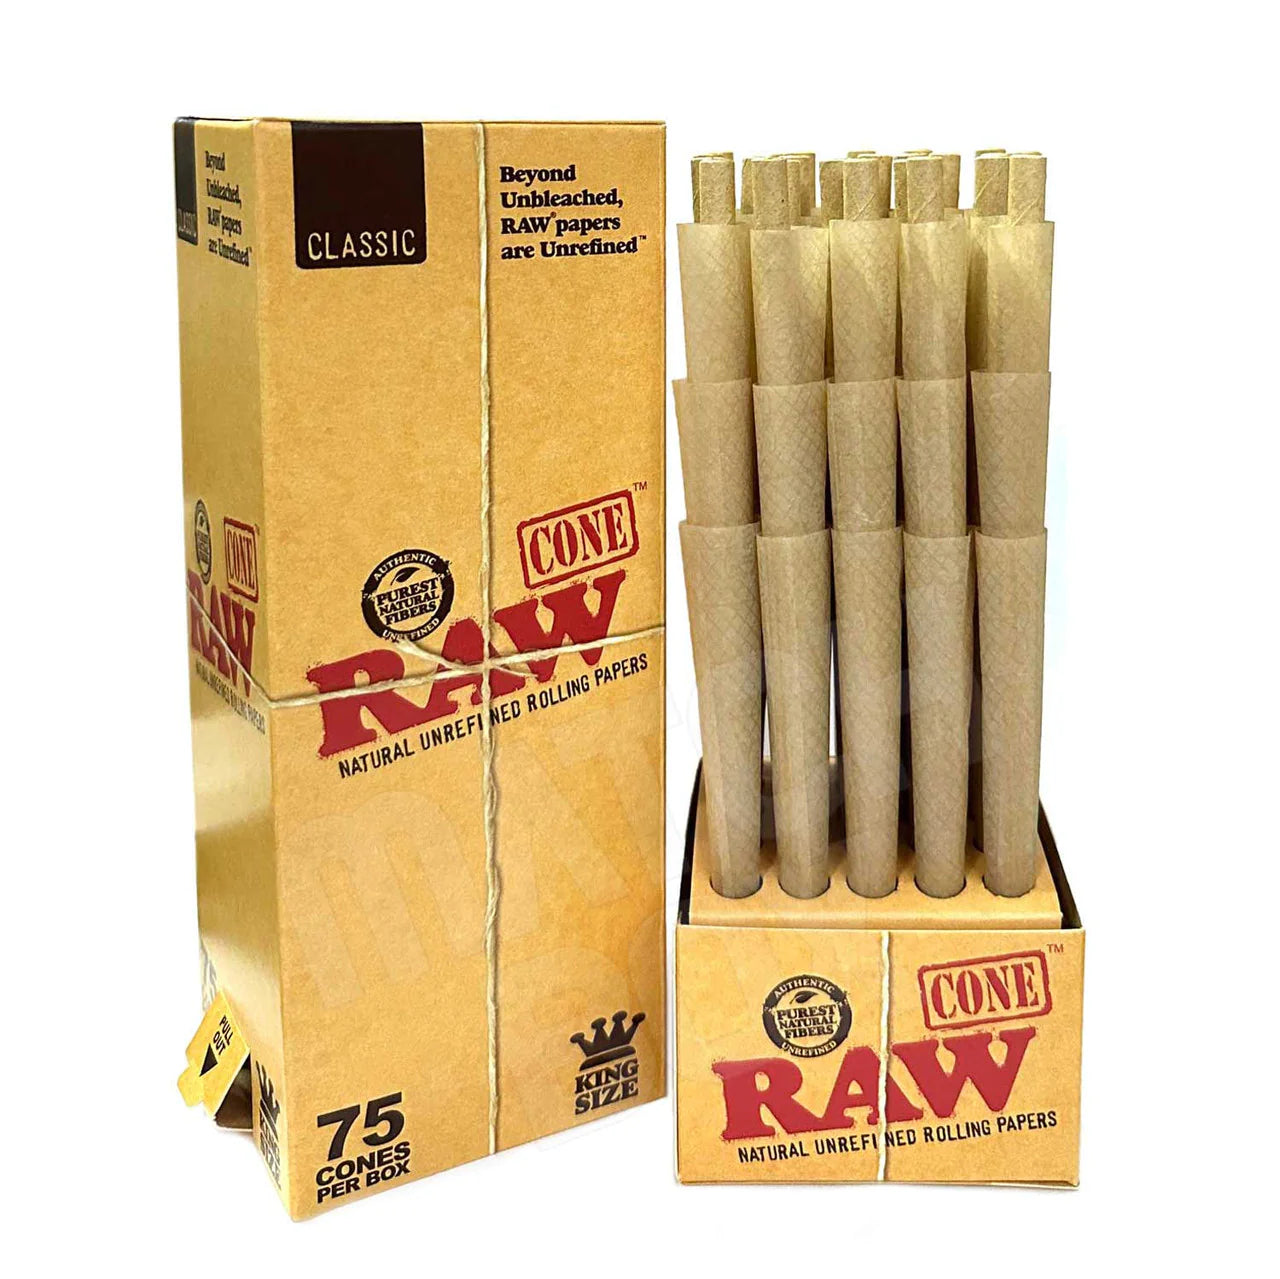 RAW CLASSIC CONES 75CT KING SIZE